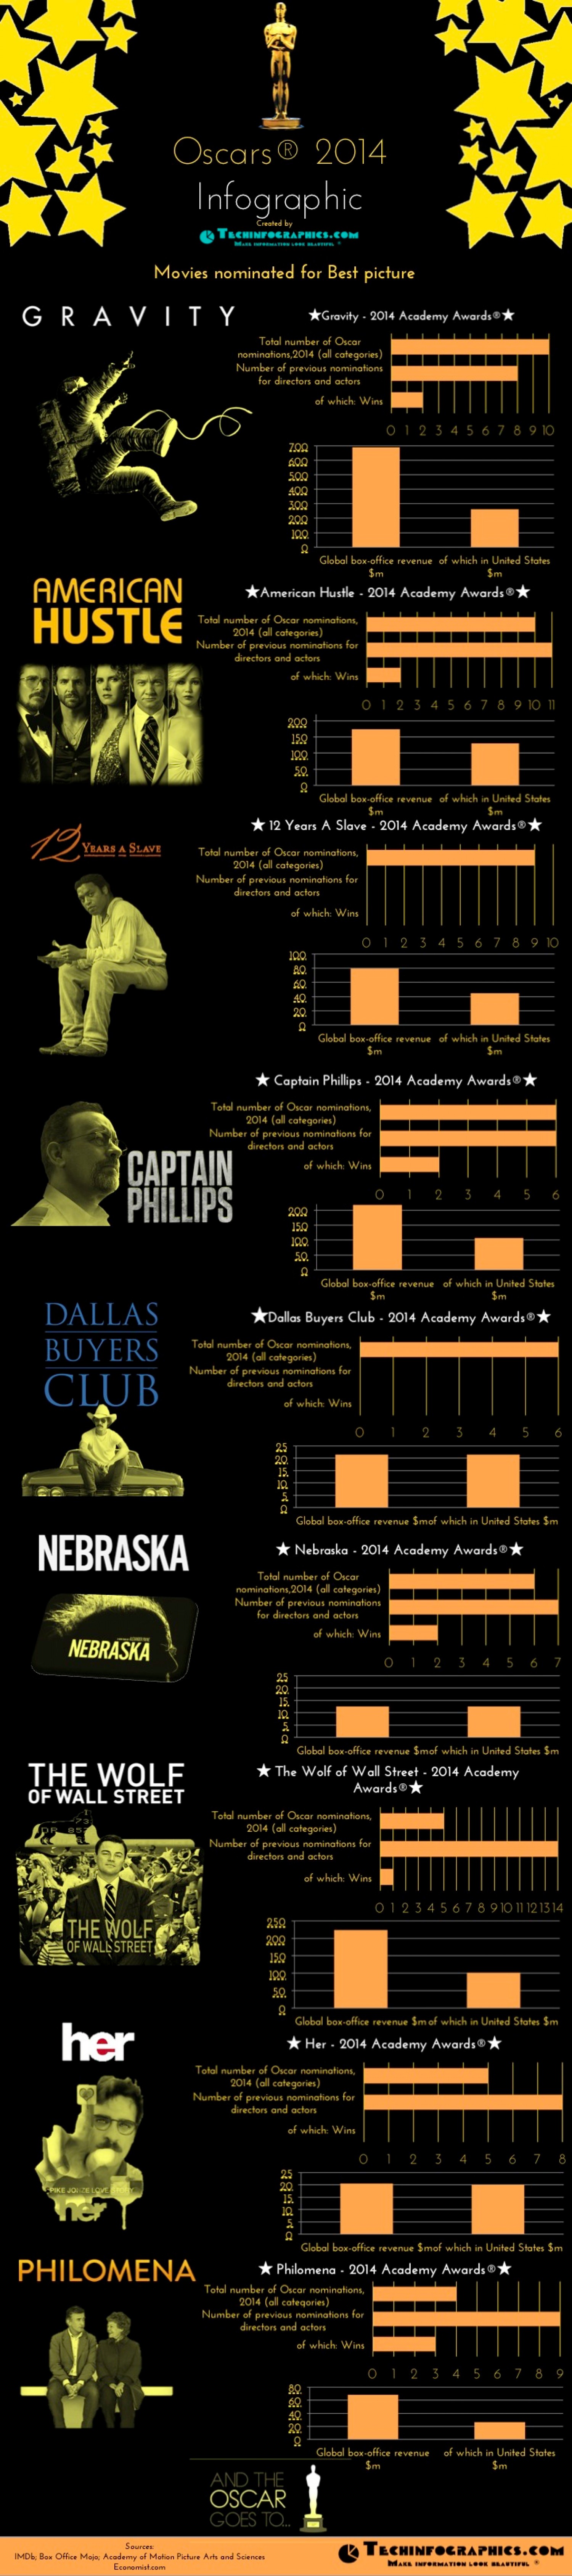 01 movie-academy-awards-2014-infographic--9-oscar-nominees-for-the-best-picture_52ee858c73491_w1500